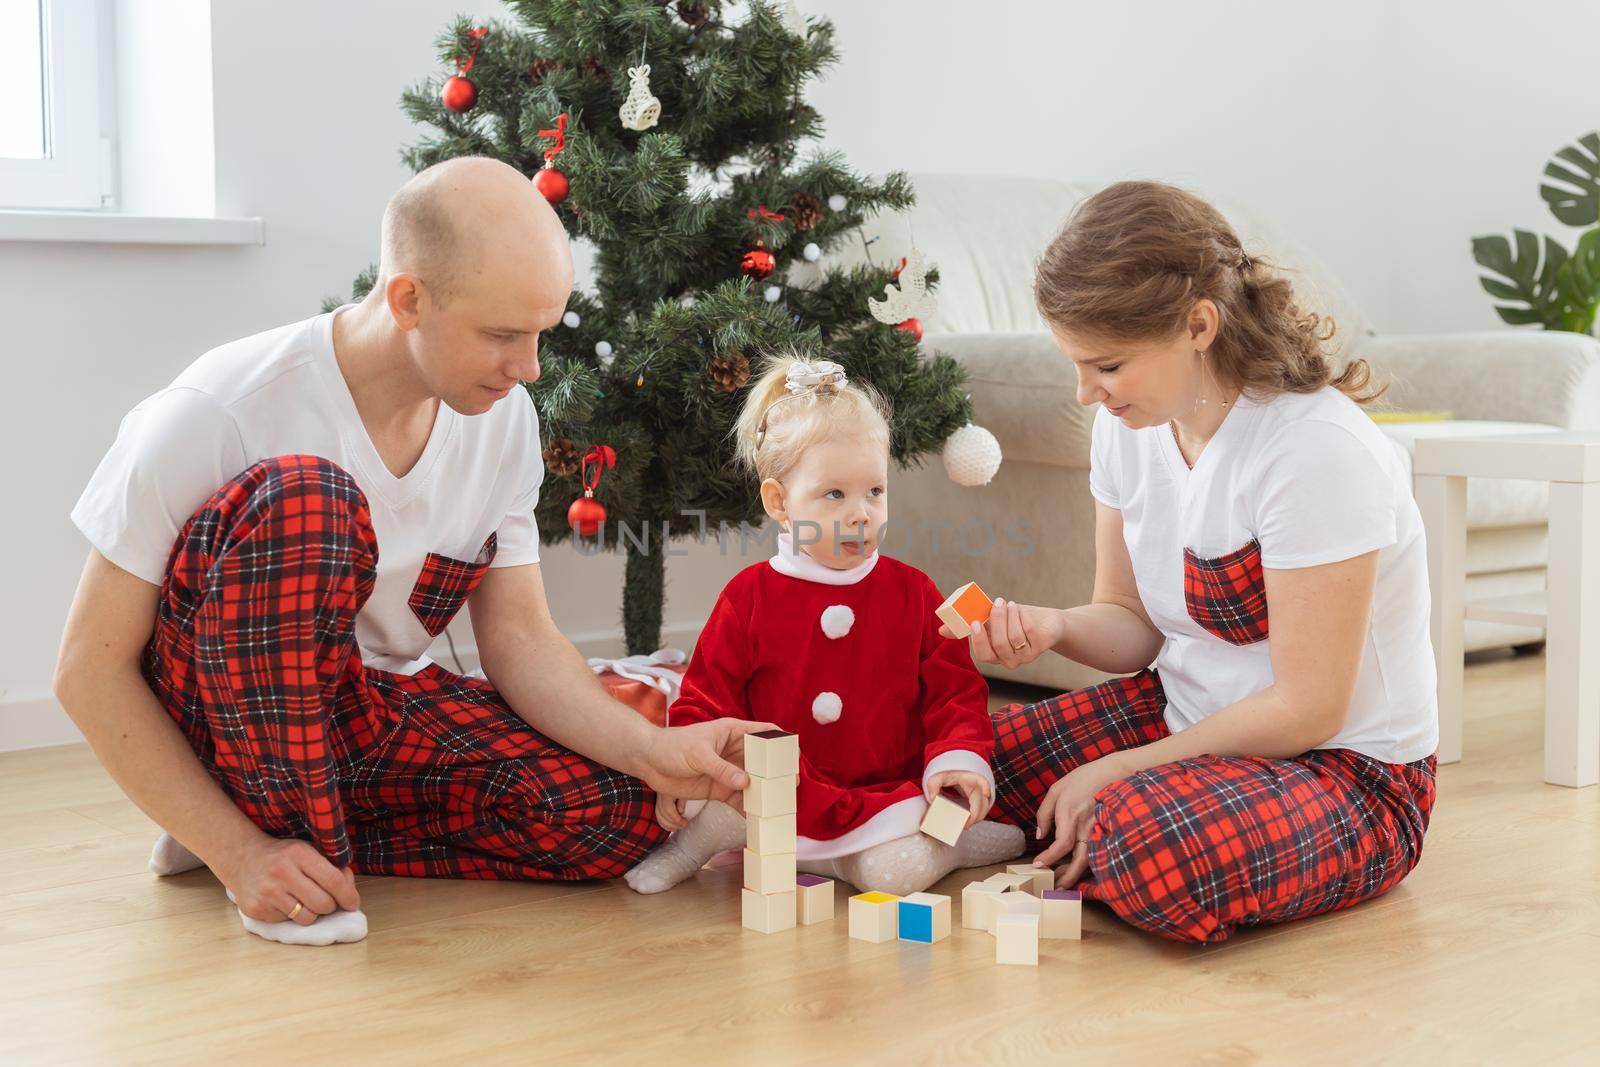 Toddler child with cochlear implant decorating christmas tree deafness and innovating medical technologies for hearing aid